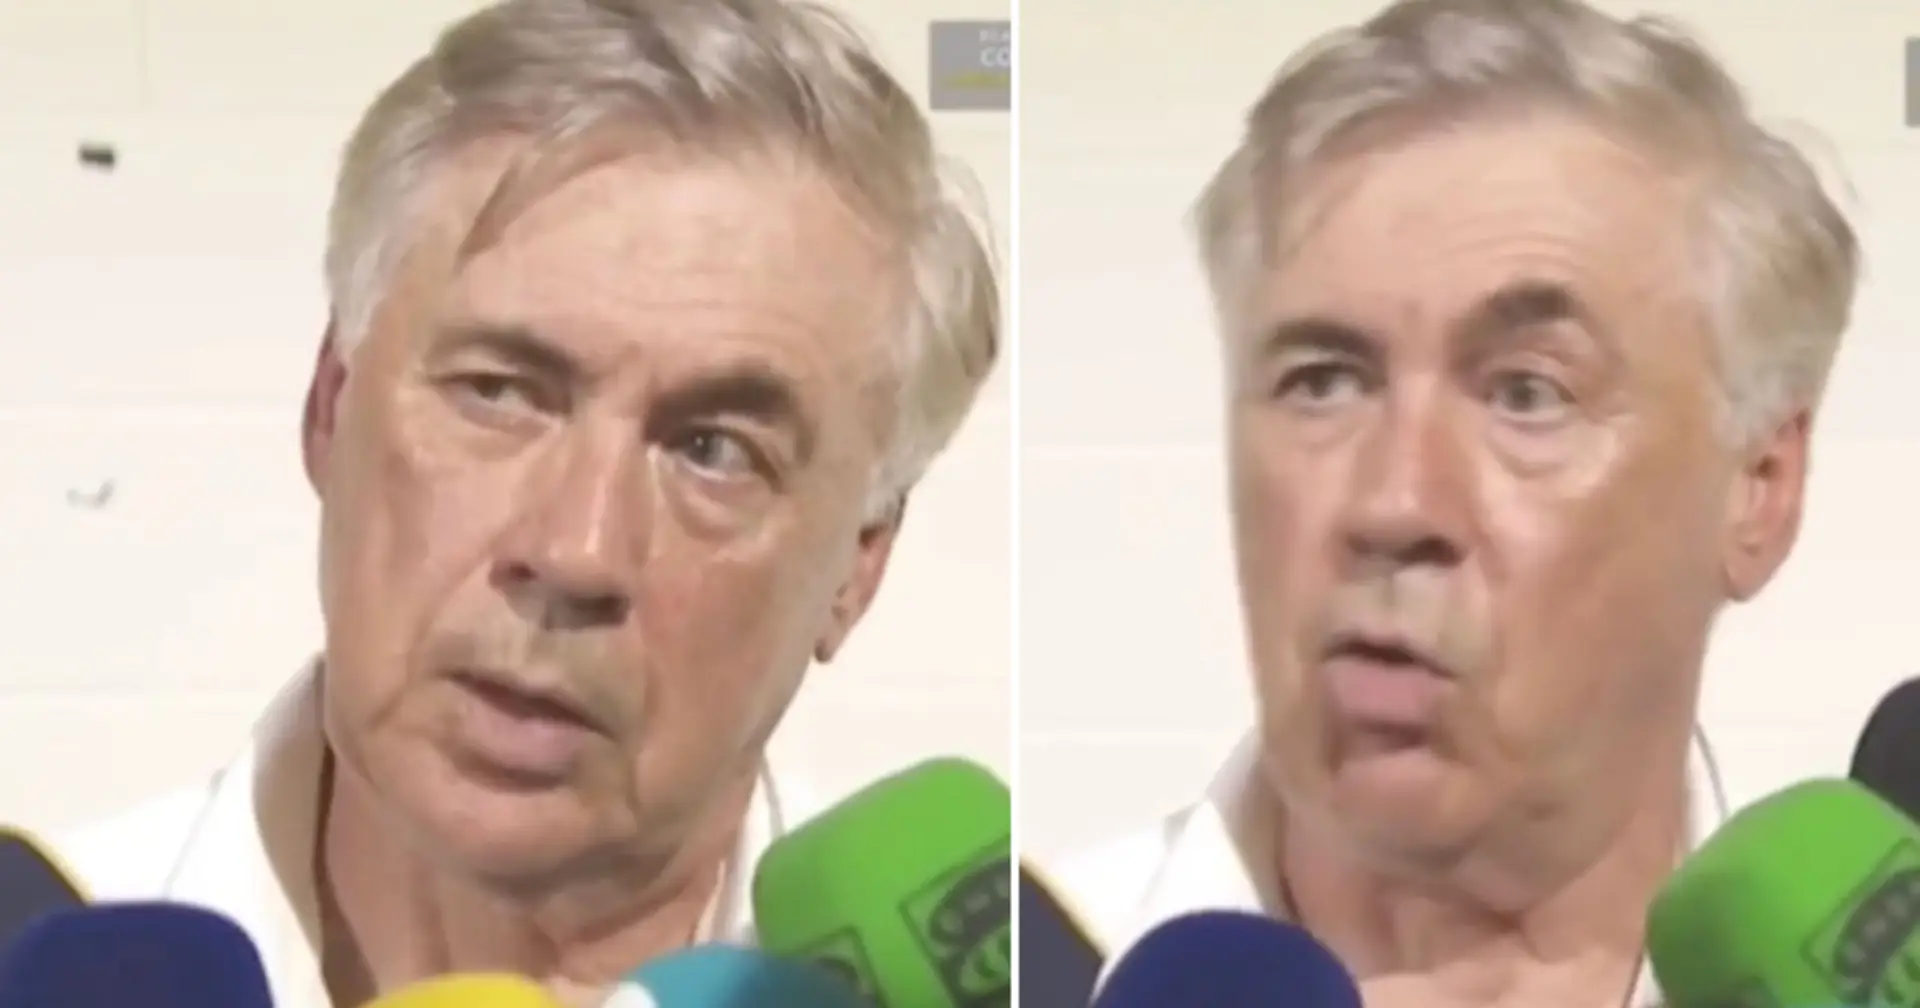 'We're not used to it': Ancelotti gives verdict on Real Madrid's pre-season, names main aspect to improve